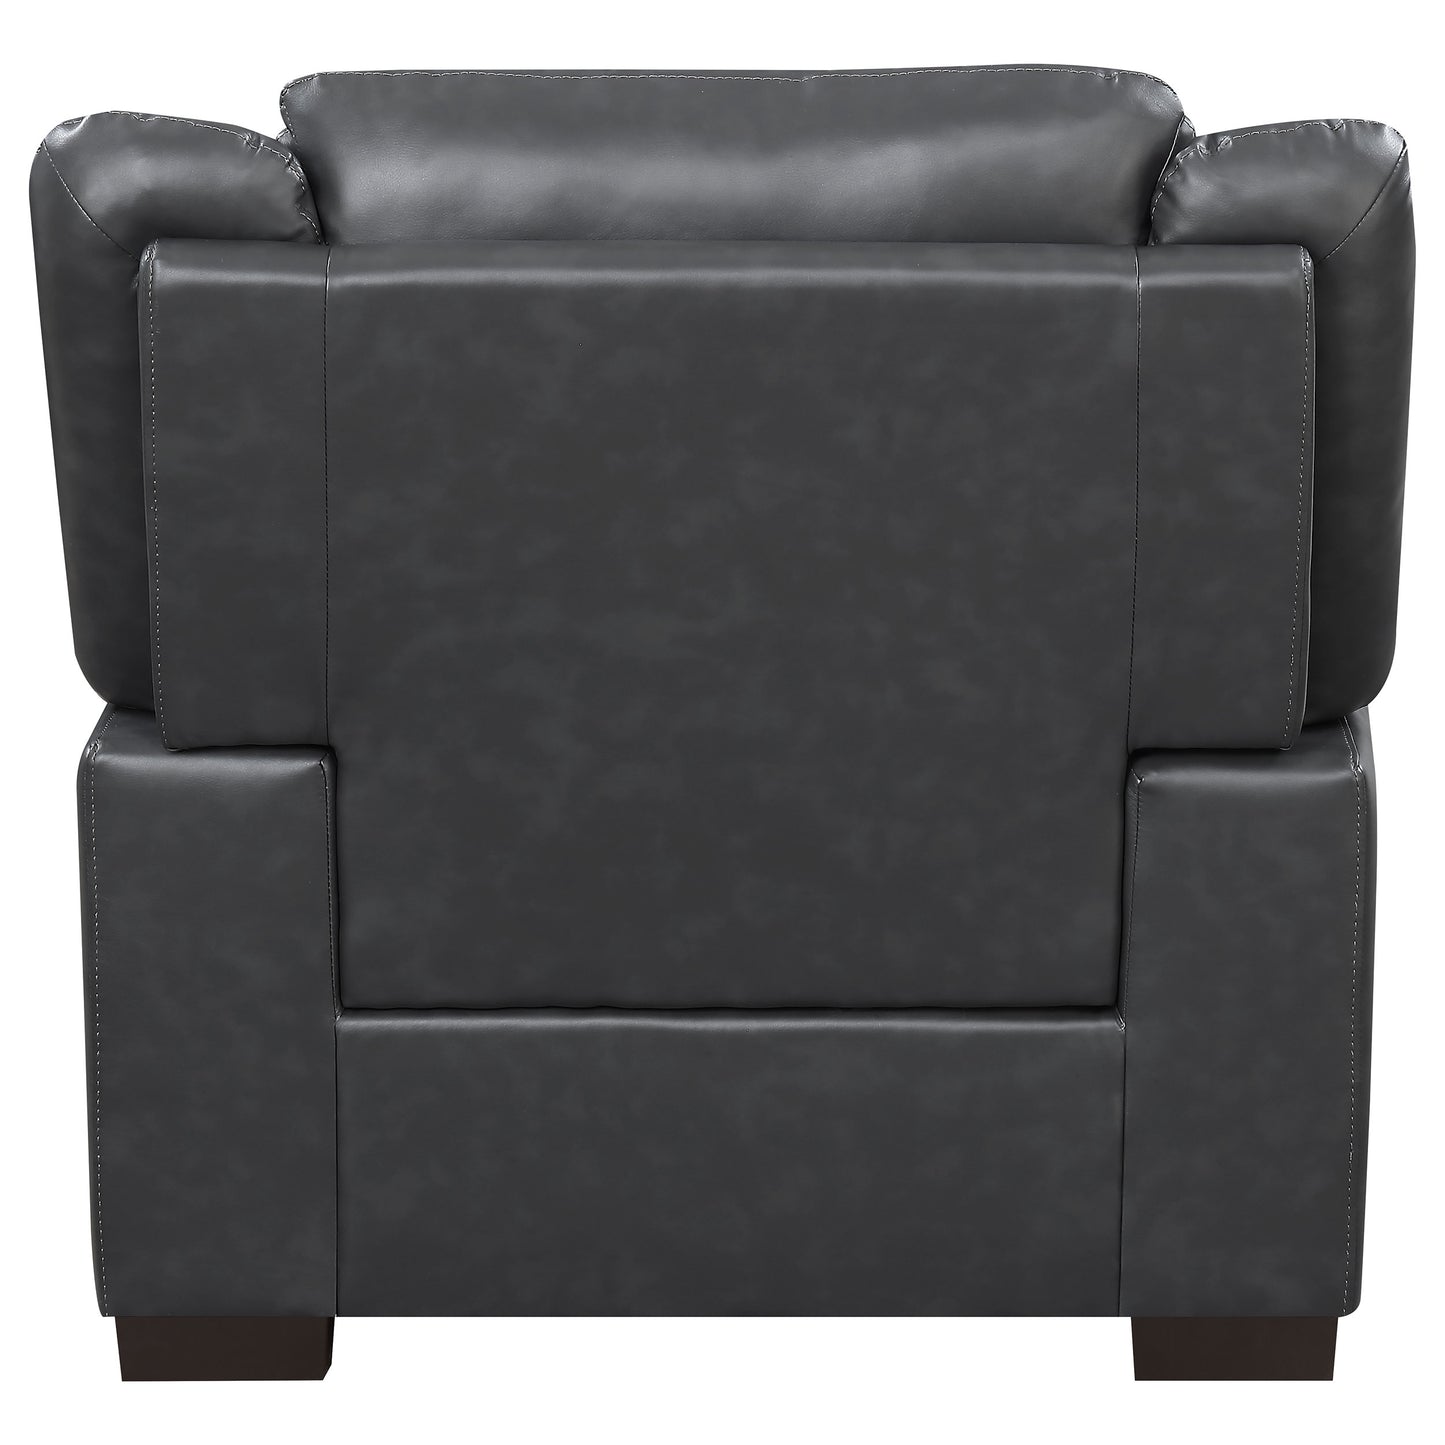 Arabella Pillow Top Upholstered Chair Grey